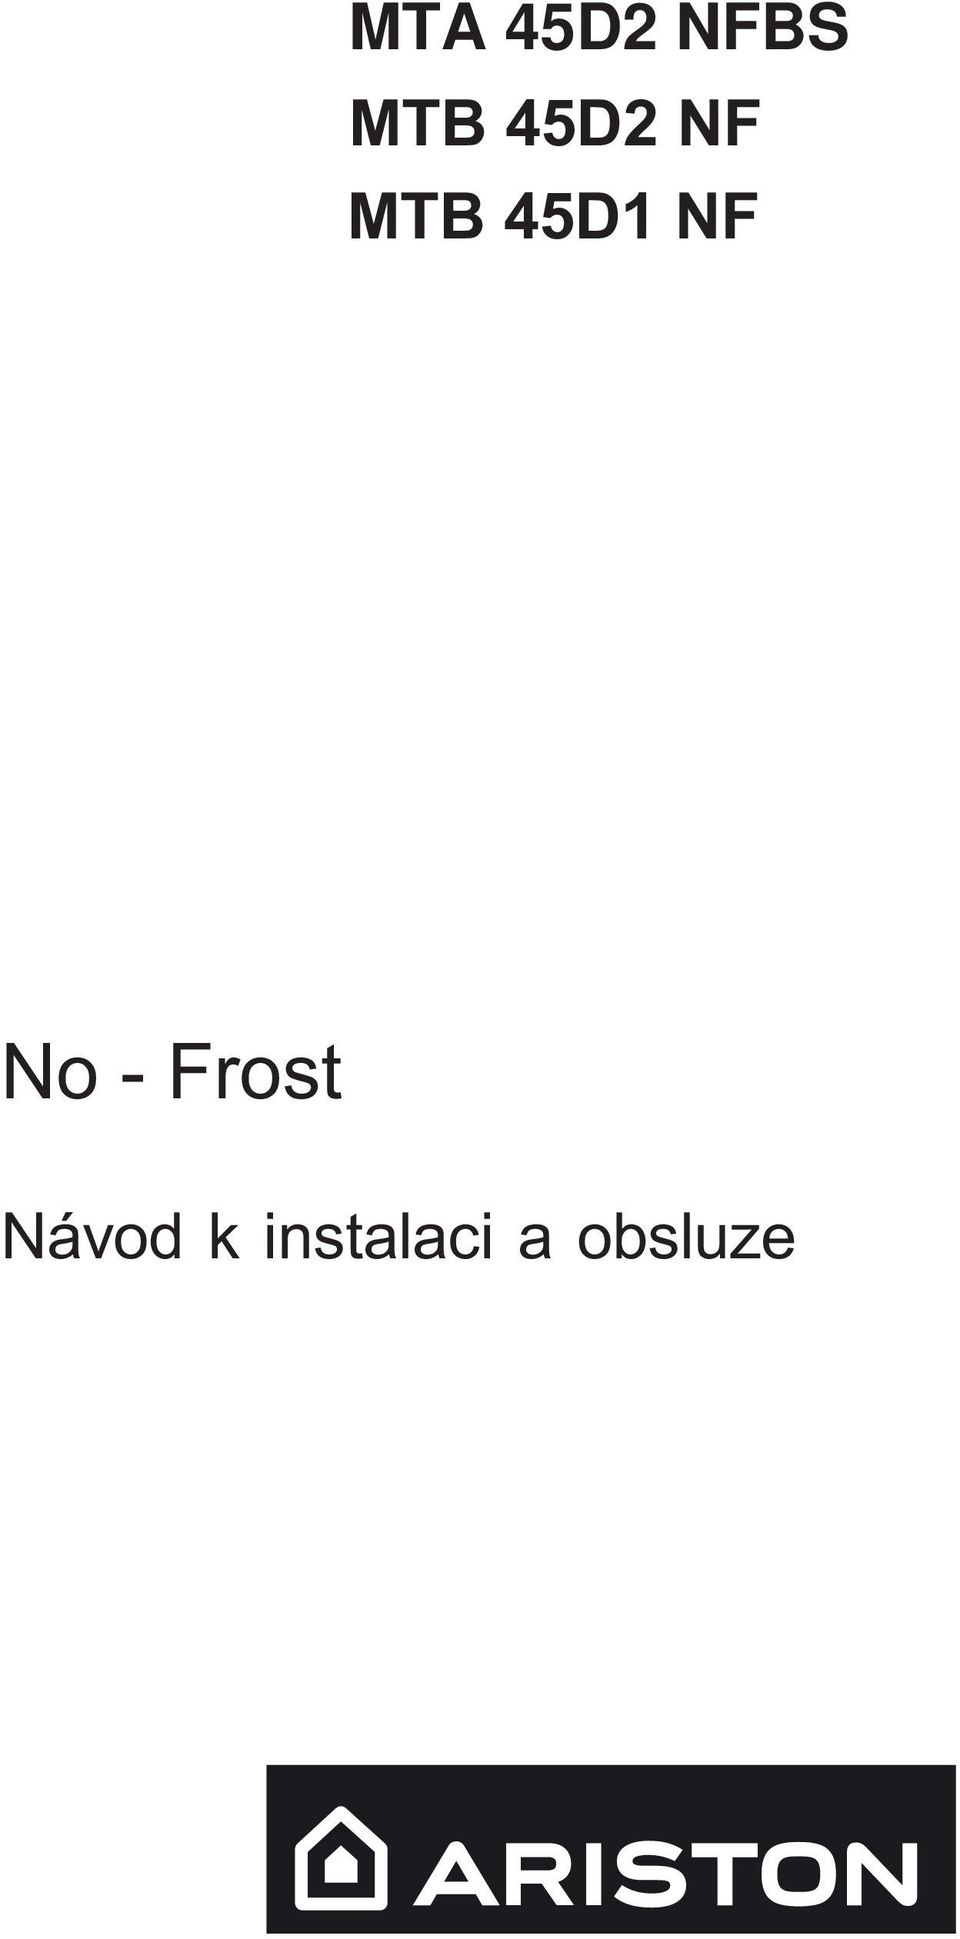 NF No - Frost